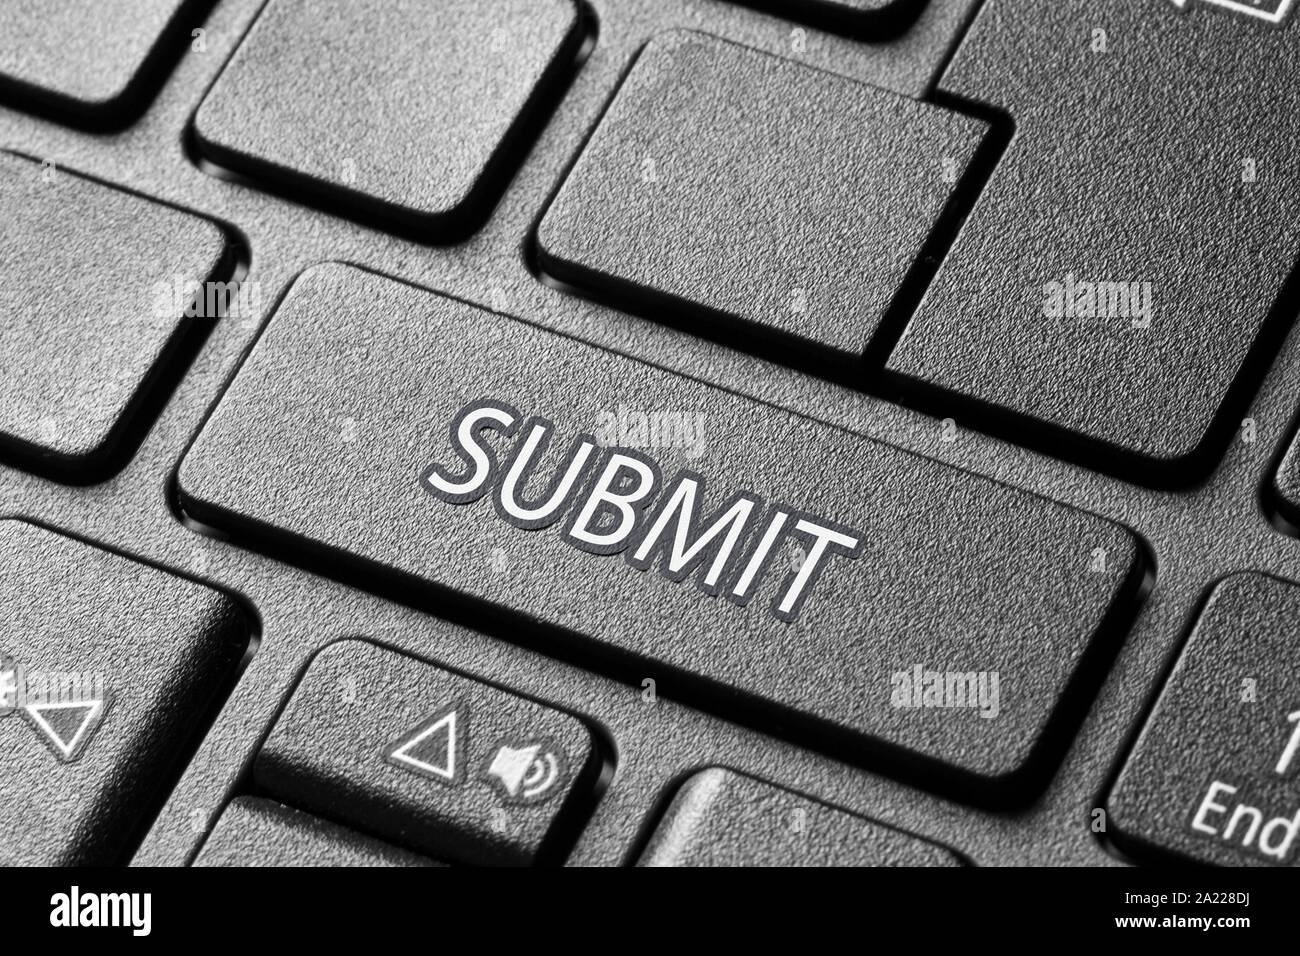 submit button on pc keyboard Stock Photo